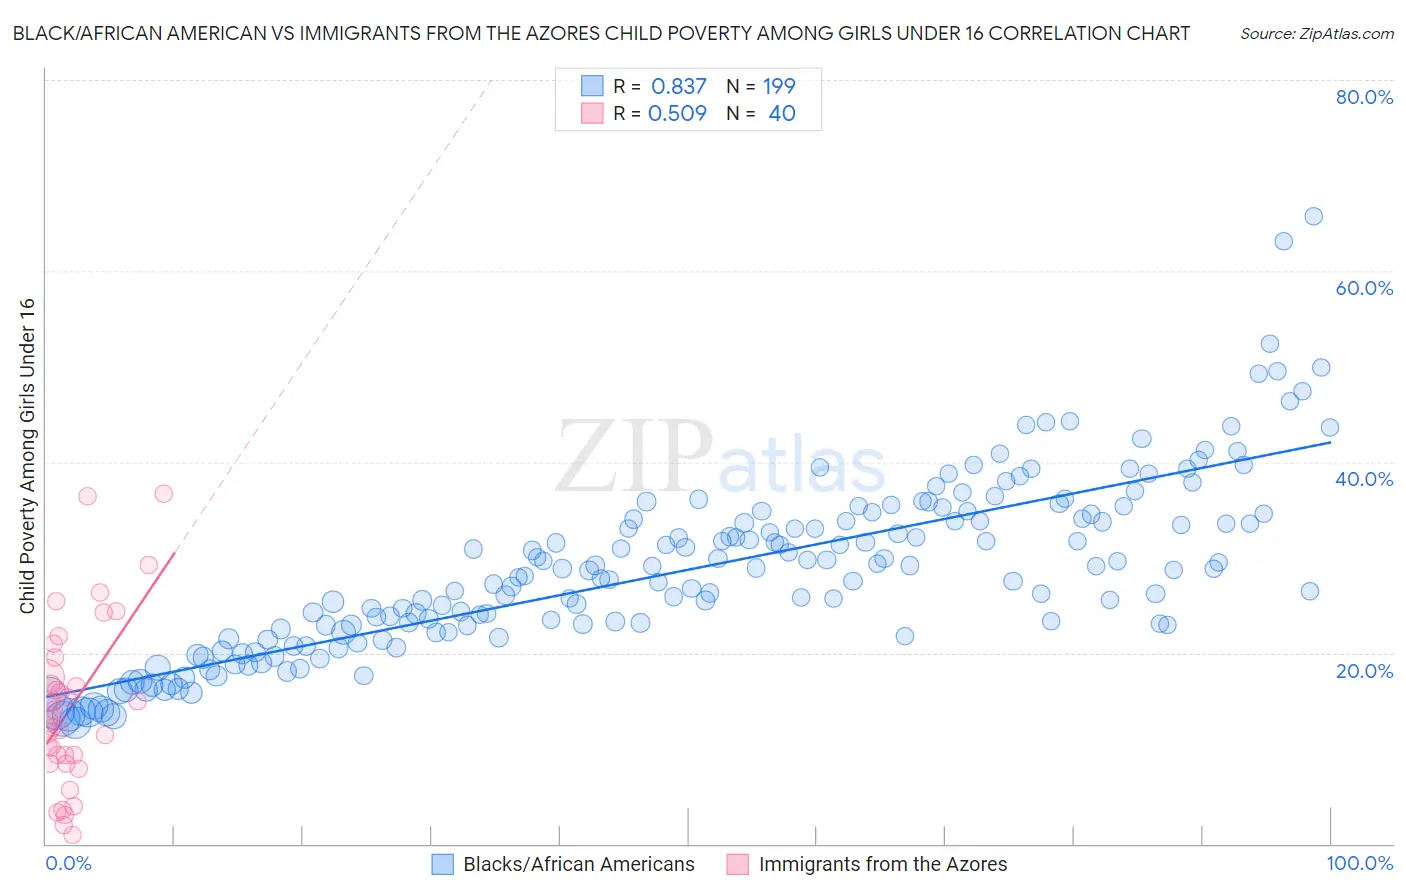 Black/African American vs Immigrants from the Azores Child Poverty Among Girls Under 16